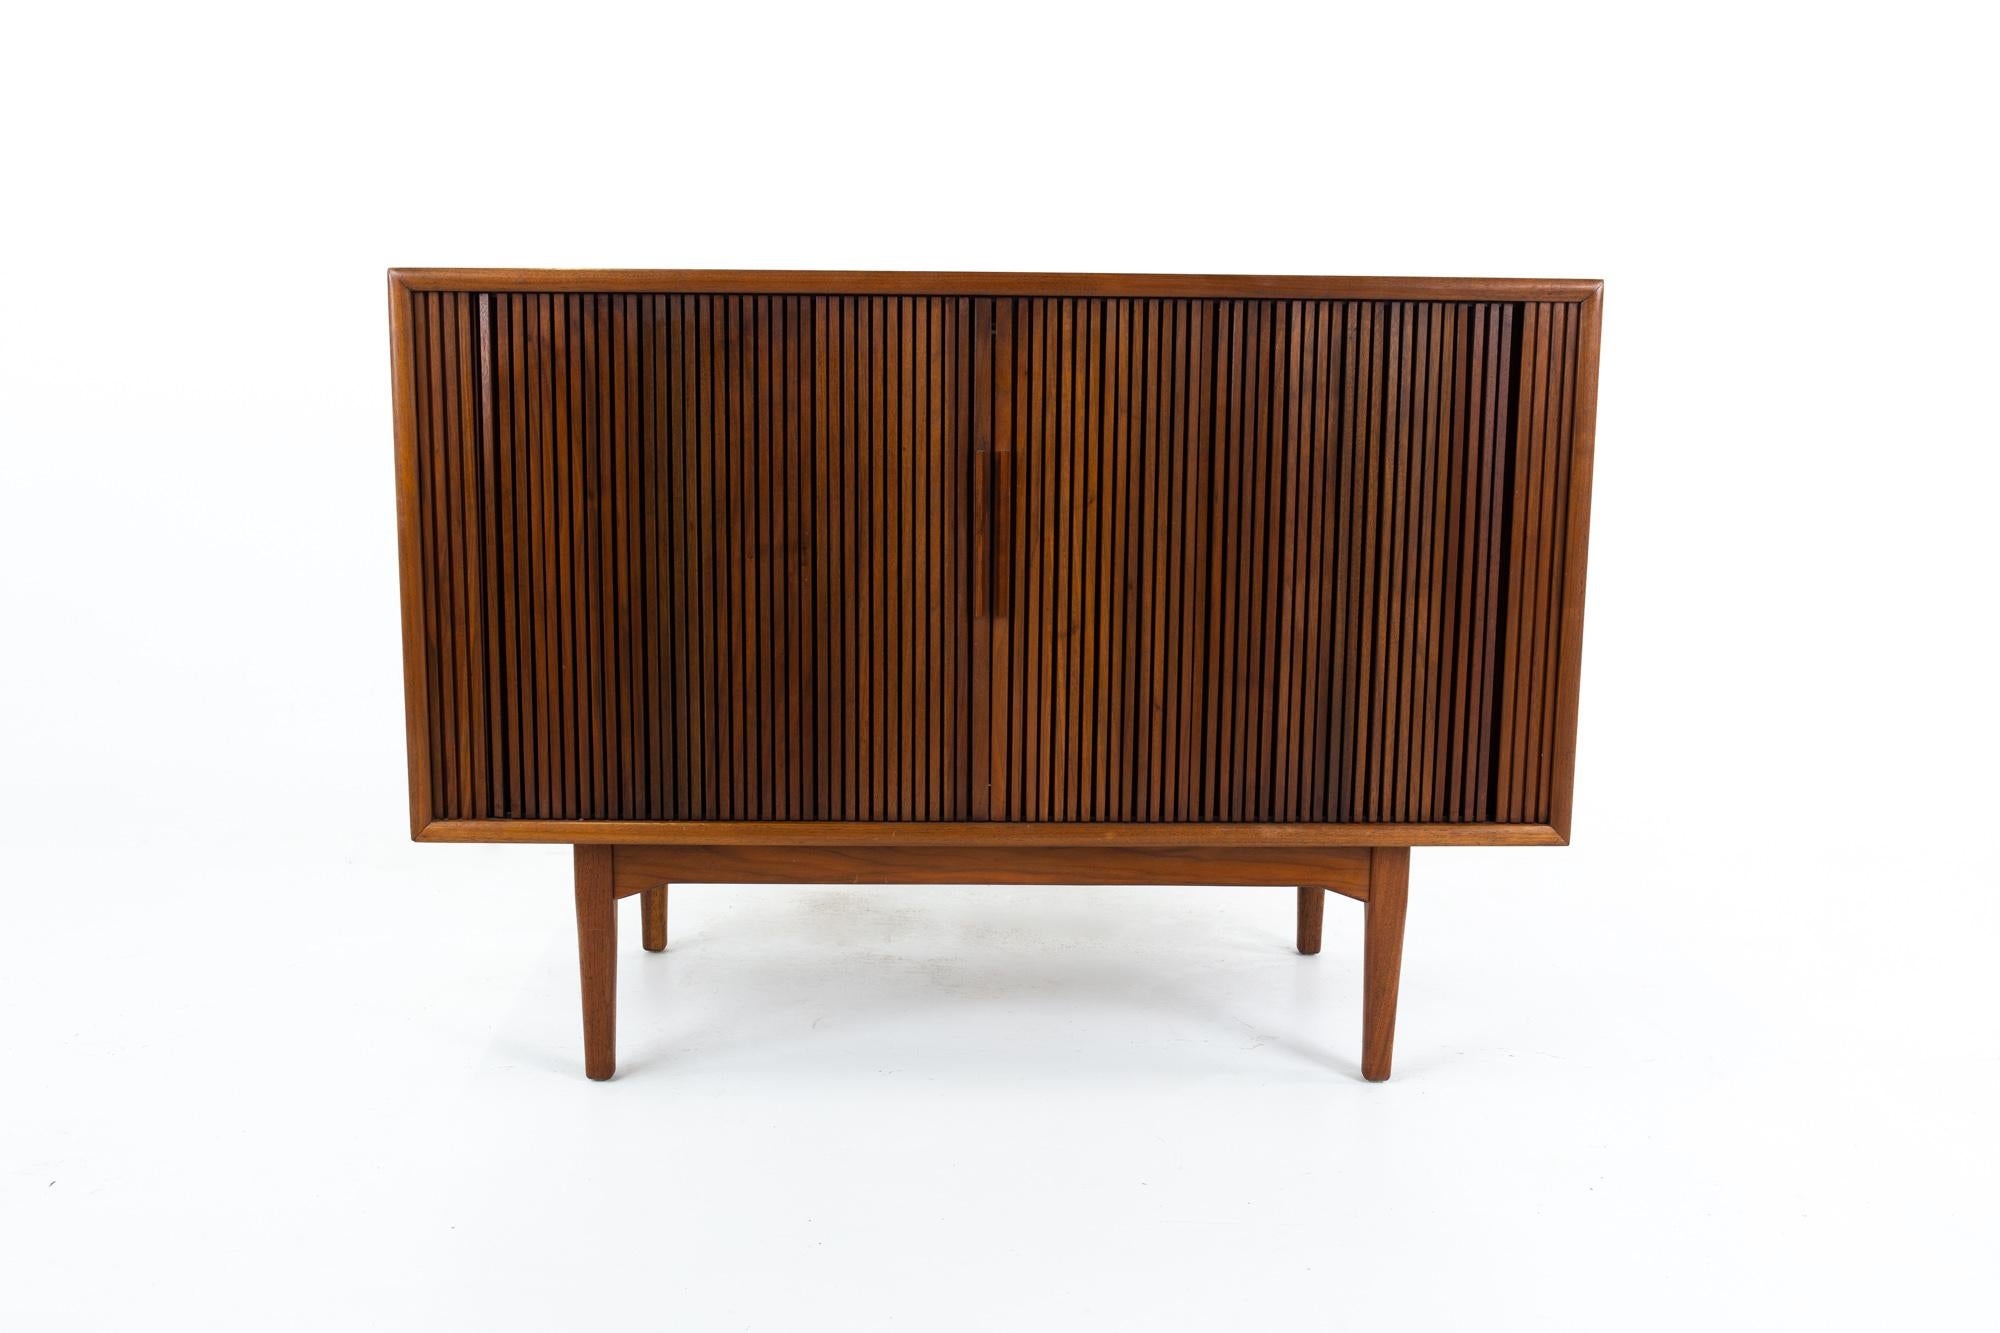 Kipp Stewart for Drexel declarations Mid Century walnut tambour door sideboard credenza
Credenza measures: 43.5 wide x 20 deep x 31 inches high

This price includes getting this piece in what we call restored vintage condition. That means the piece